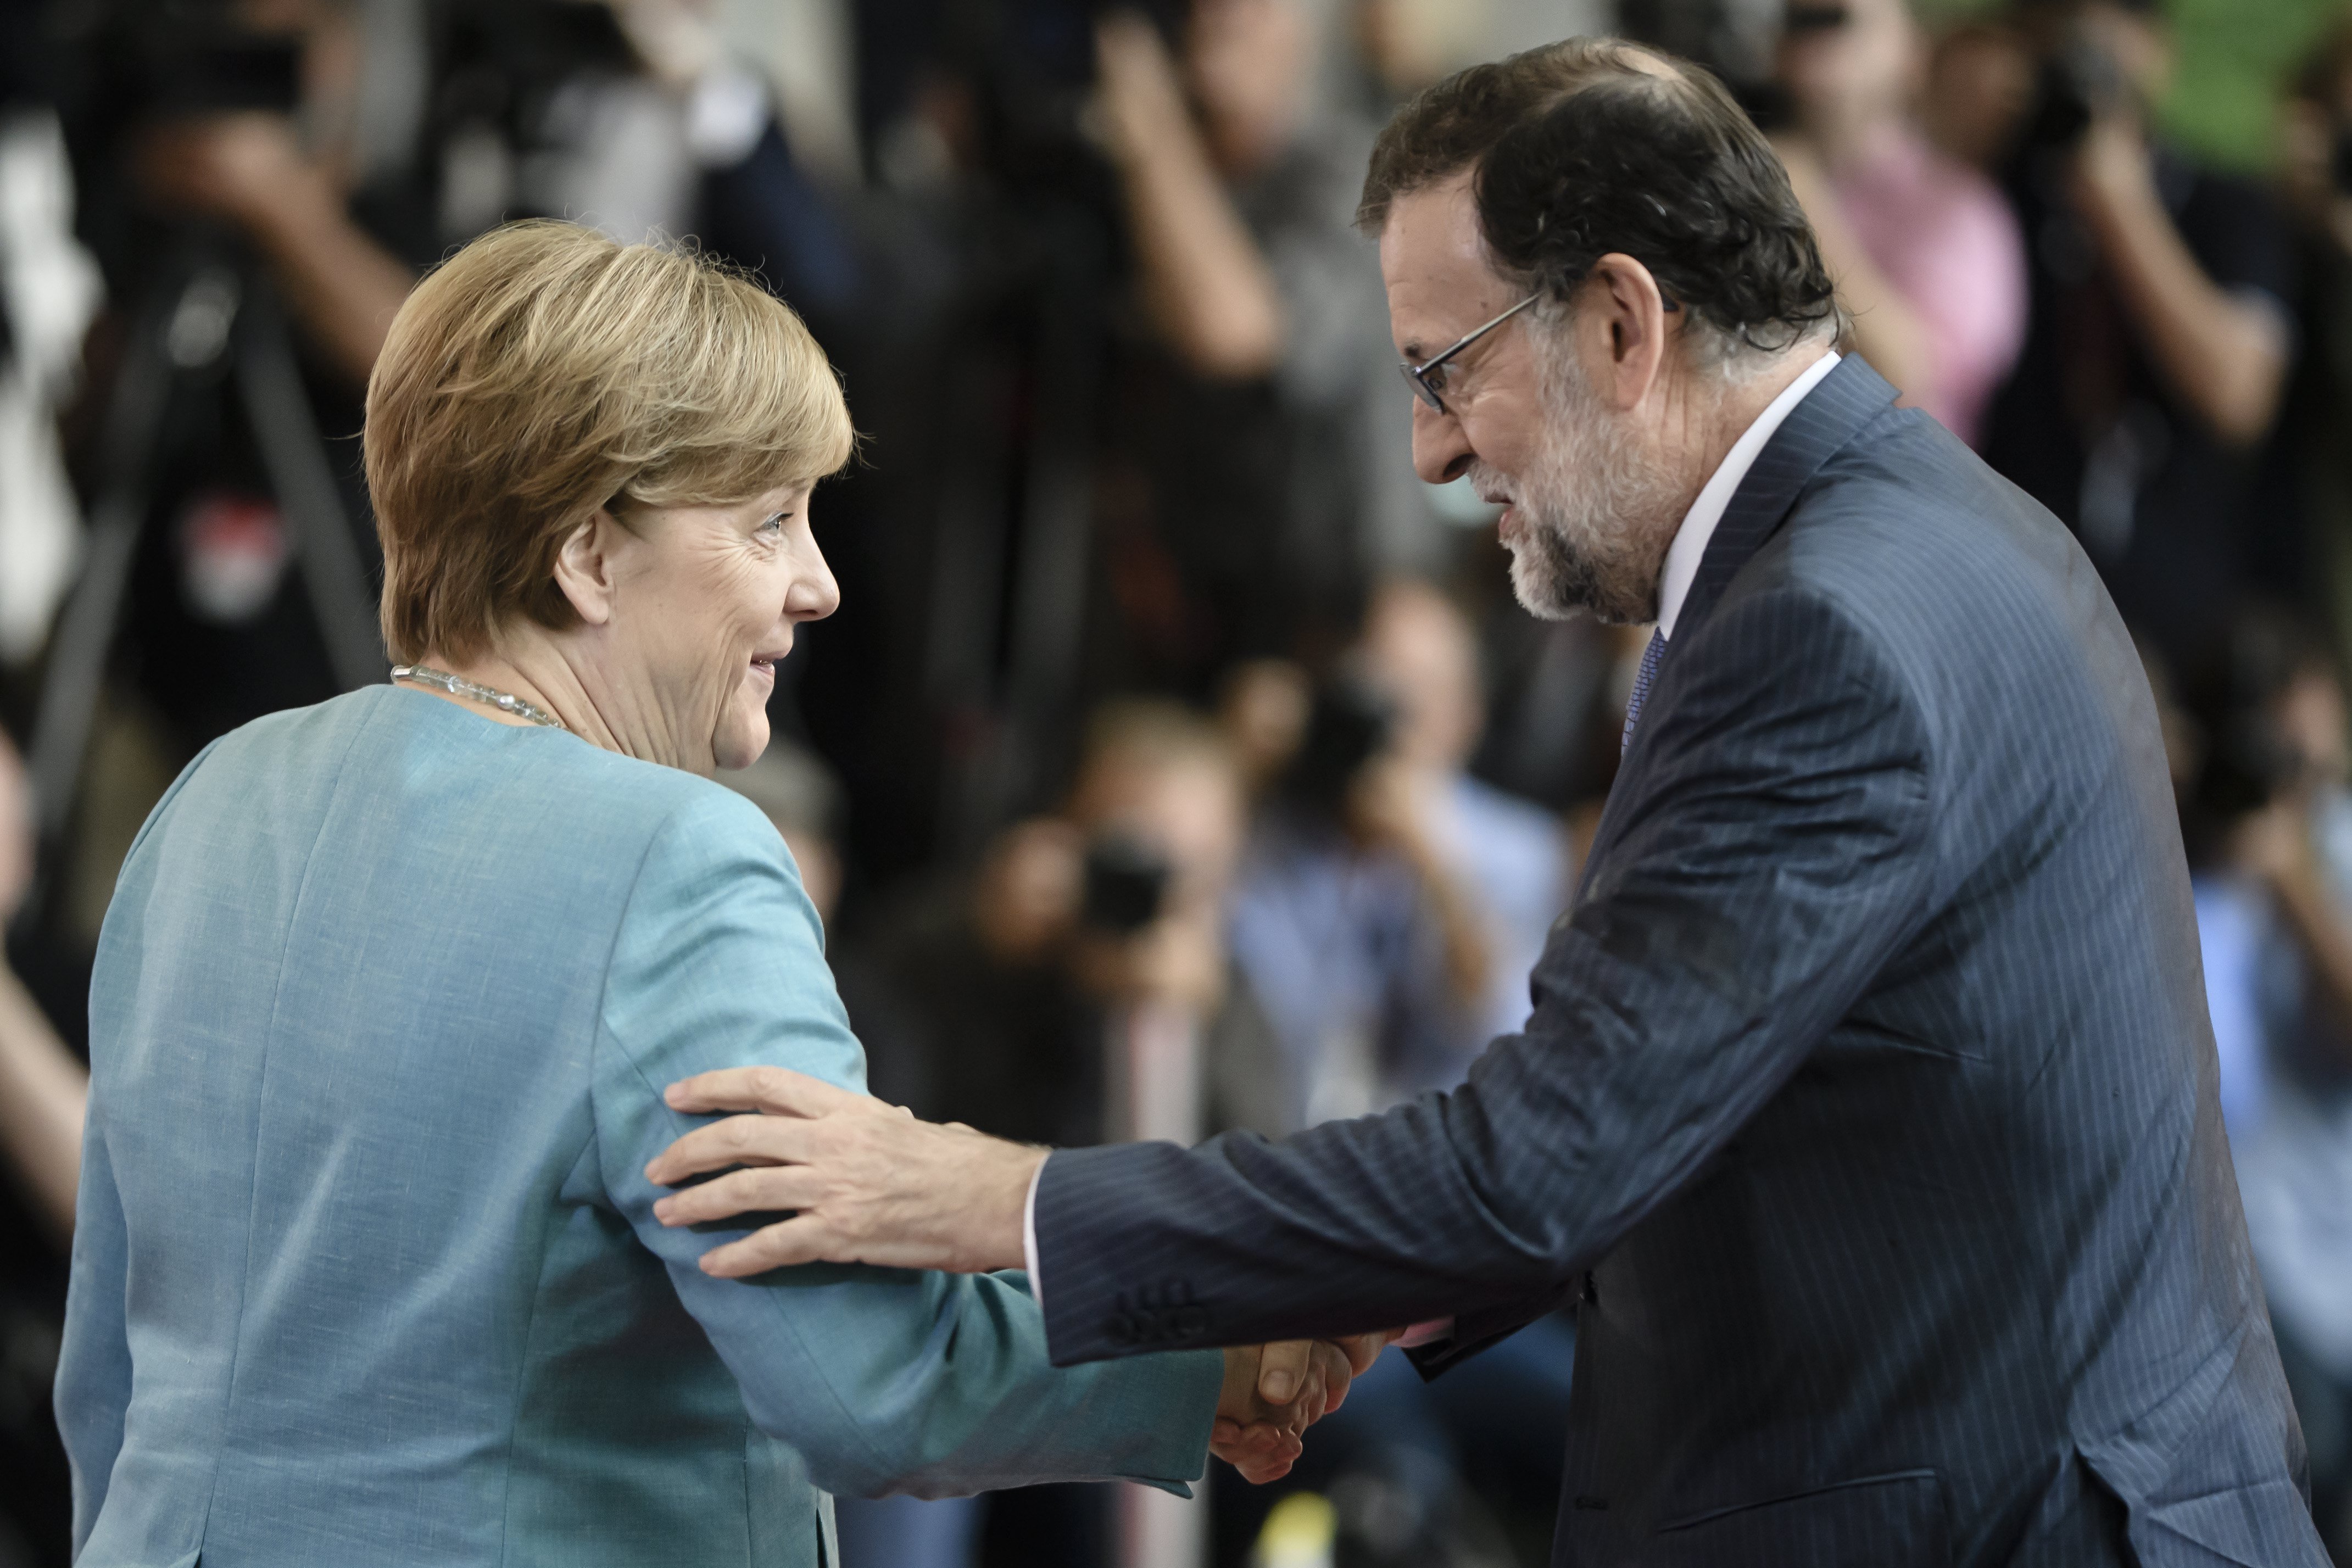 Germany: "the sovereignty and territorial integrity of Spain are and remain inviolable"